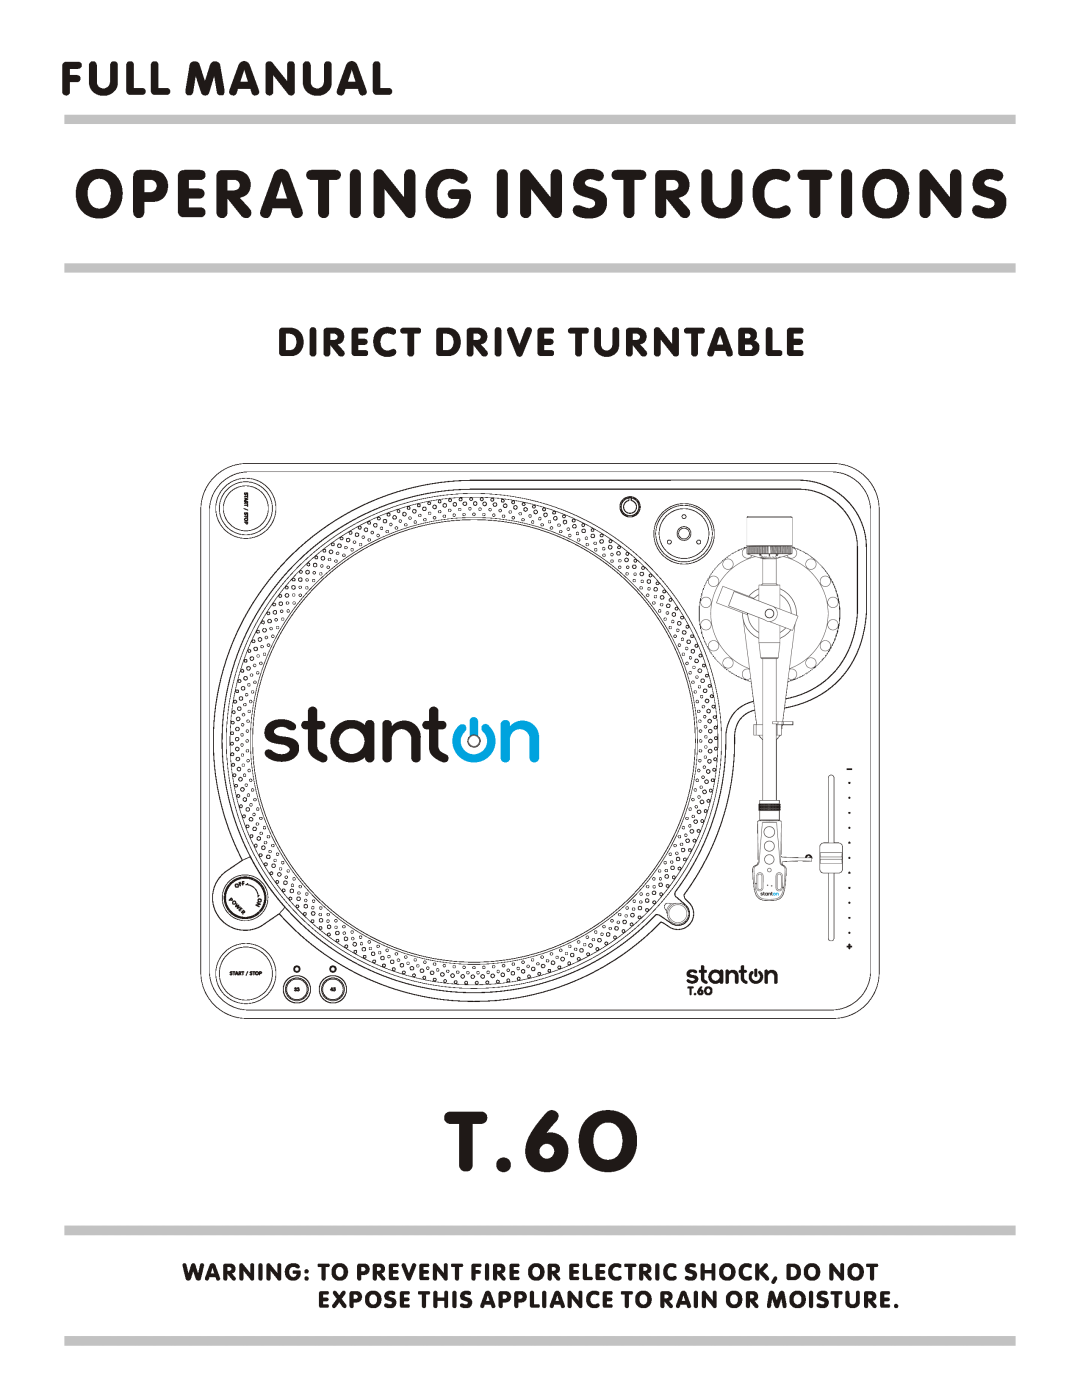 Stanton T.60 operating instructions T.6O, Operating Instructions, Full Manual, Direct Drive Turntable 